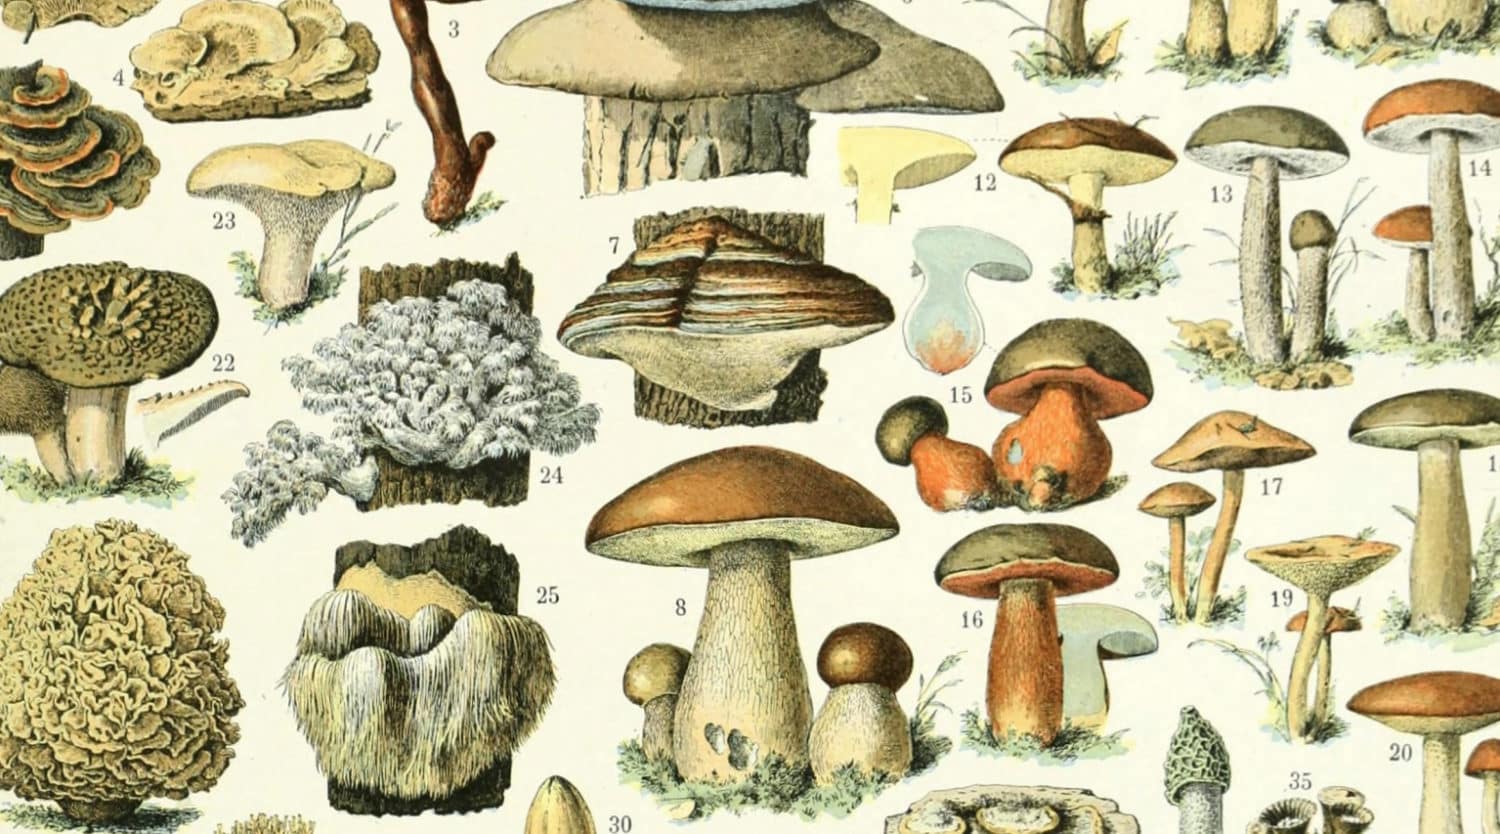 Drawings of different types of mushrooms